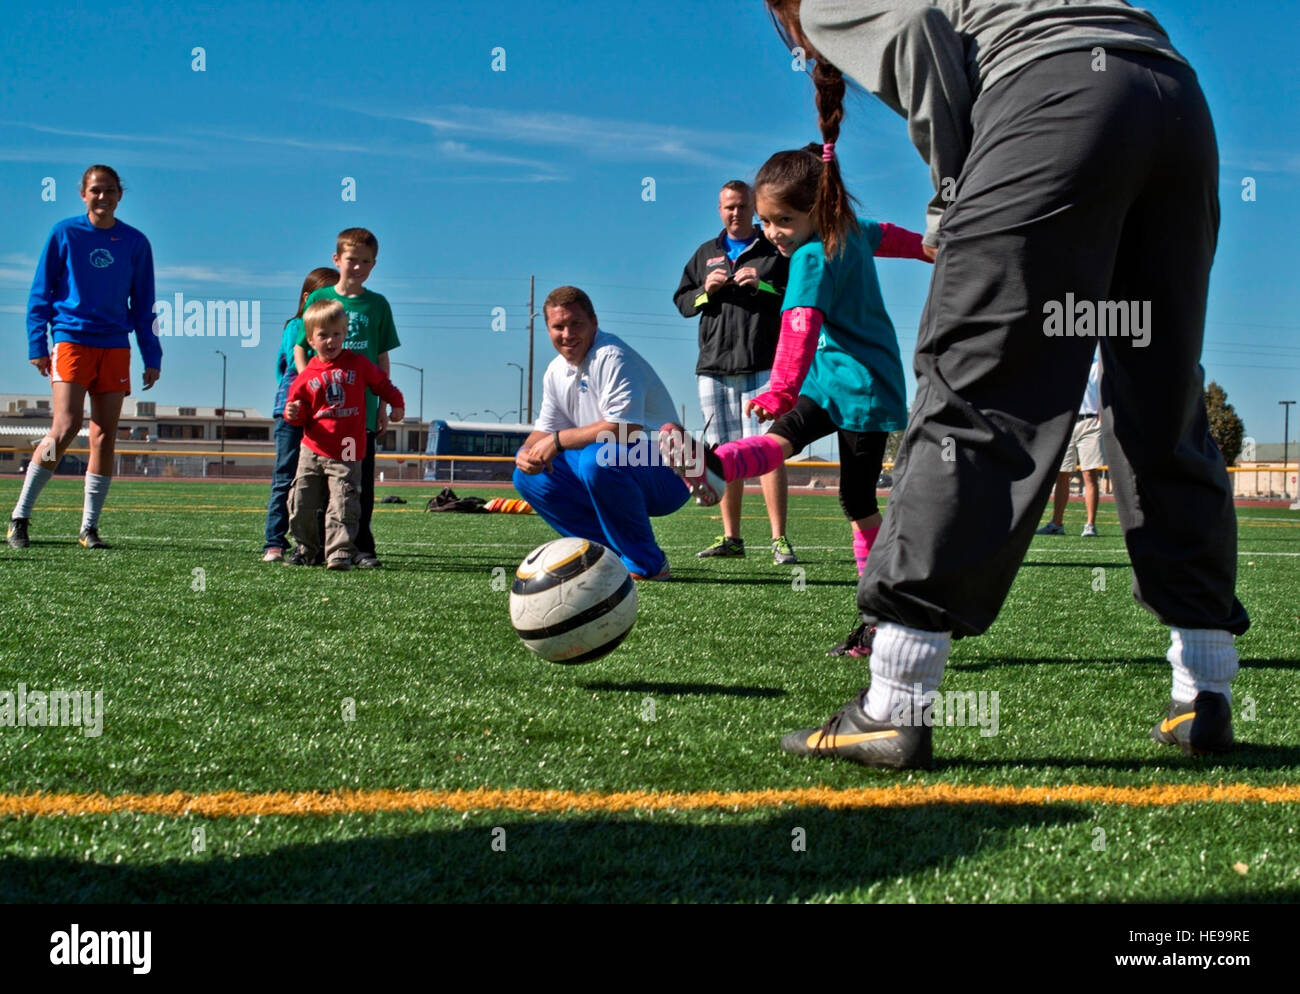 131005-F-WU507-052:  Sporting a ‘Kiss my cleats’ shirt, six-year-old Iris Hartzell, daughter of Maggie and Air Force Staff Sgt. Brendan Hartzell, 366th Communications Squadron, takes a shot at goal at Mountain Home Air Force Base, Idaho, Oct. 5, 2013. The keeper was one of fourteen Boise State University ladies soccer players who visited base as part of their Military Appreciation Day.  Master Sgt. Kevin Wallace/) Stock Photo